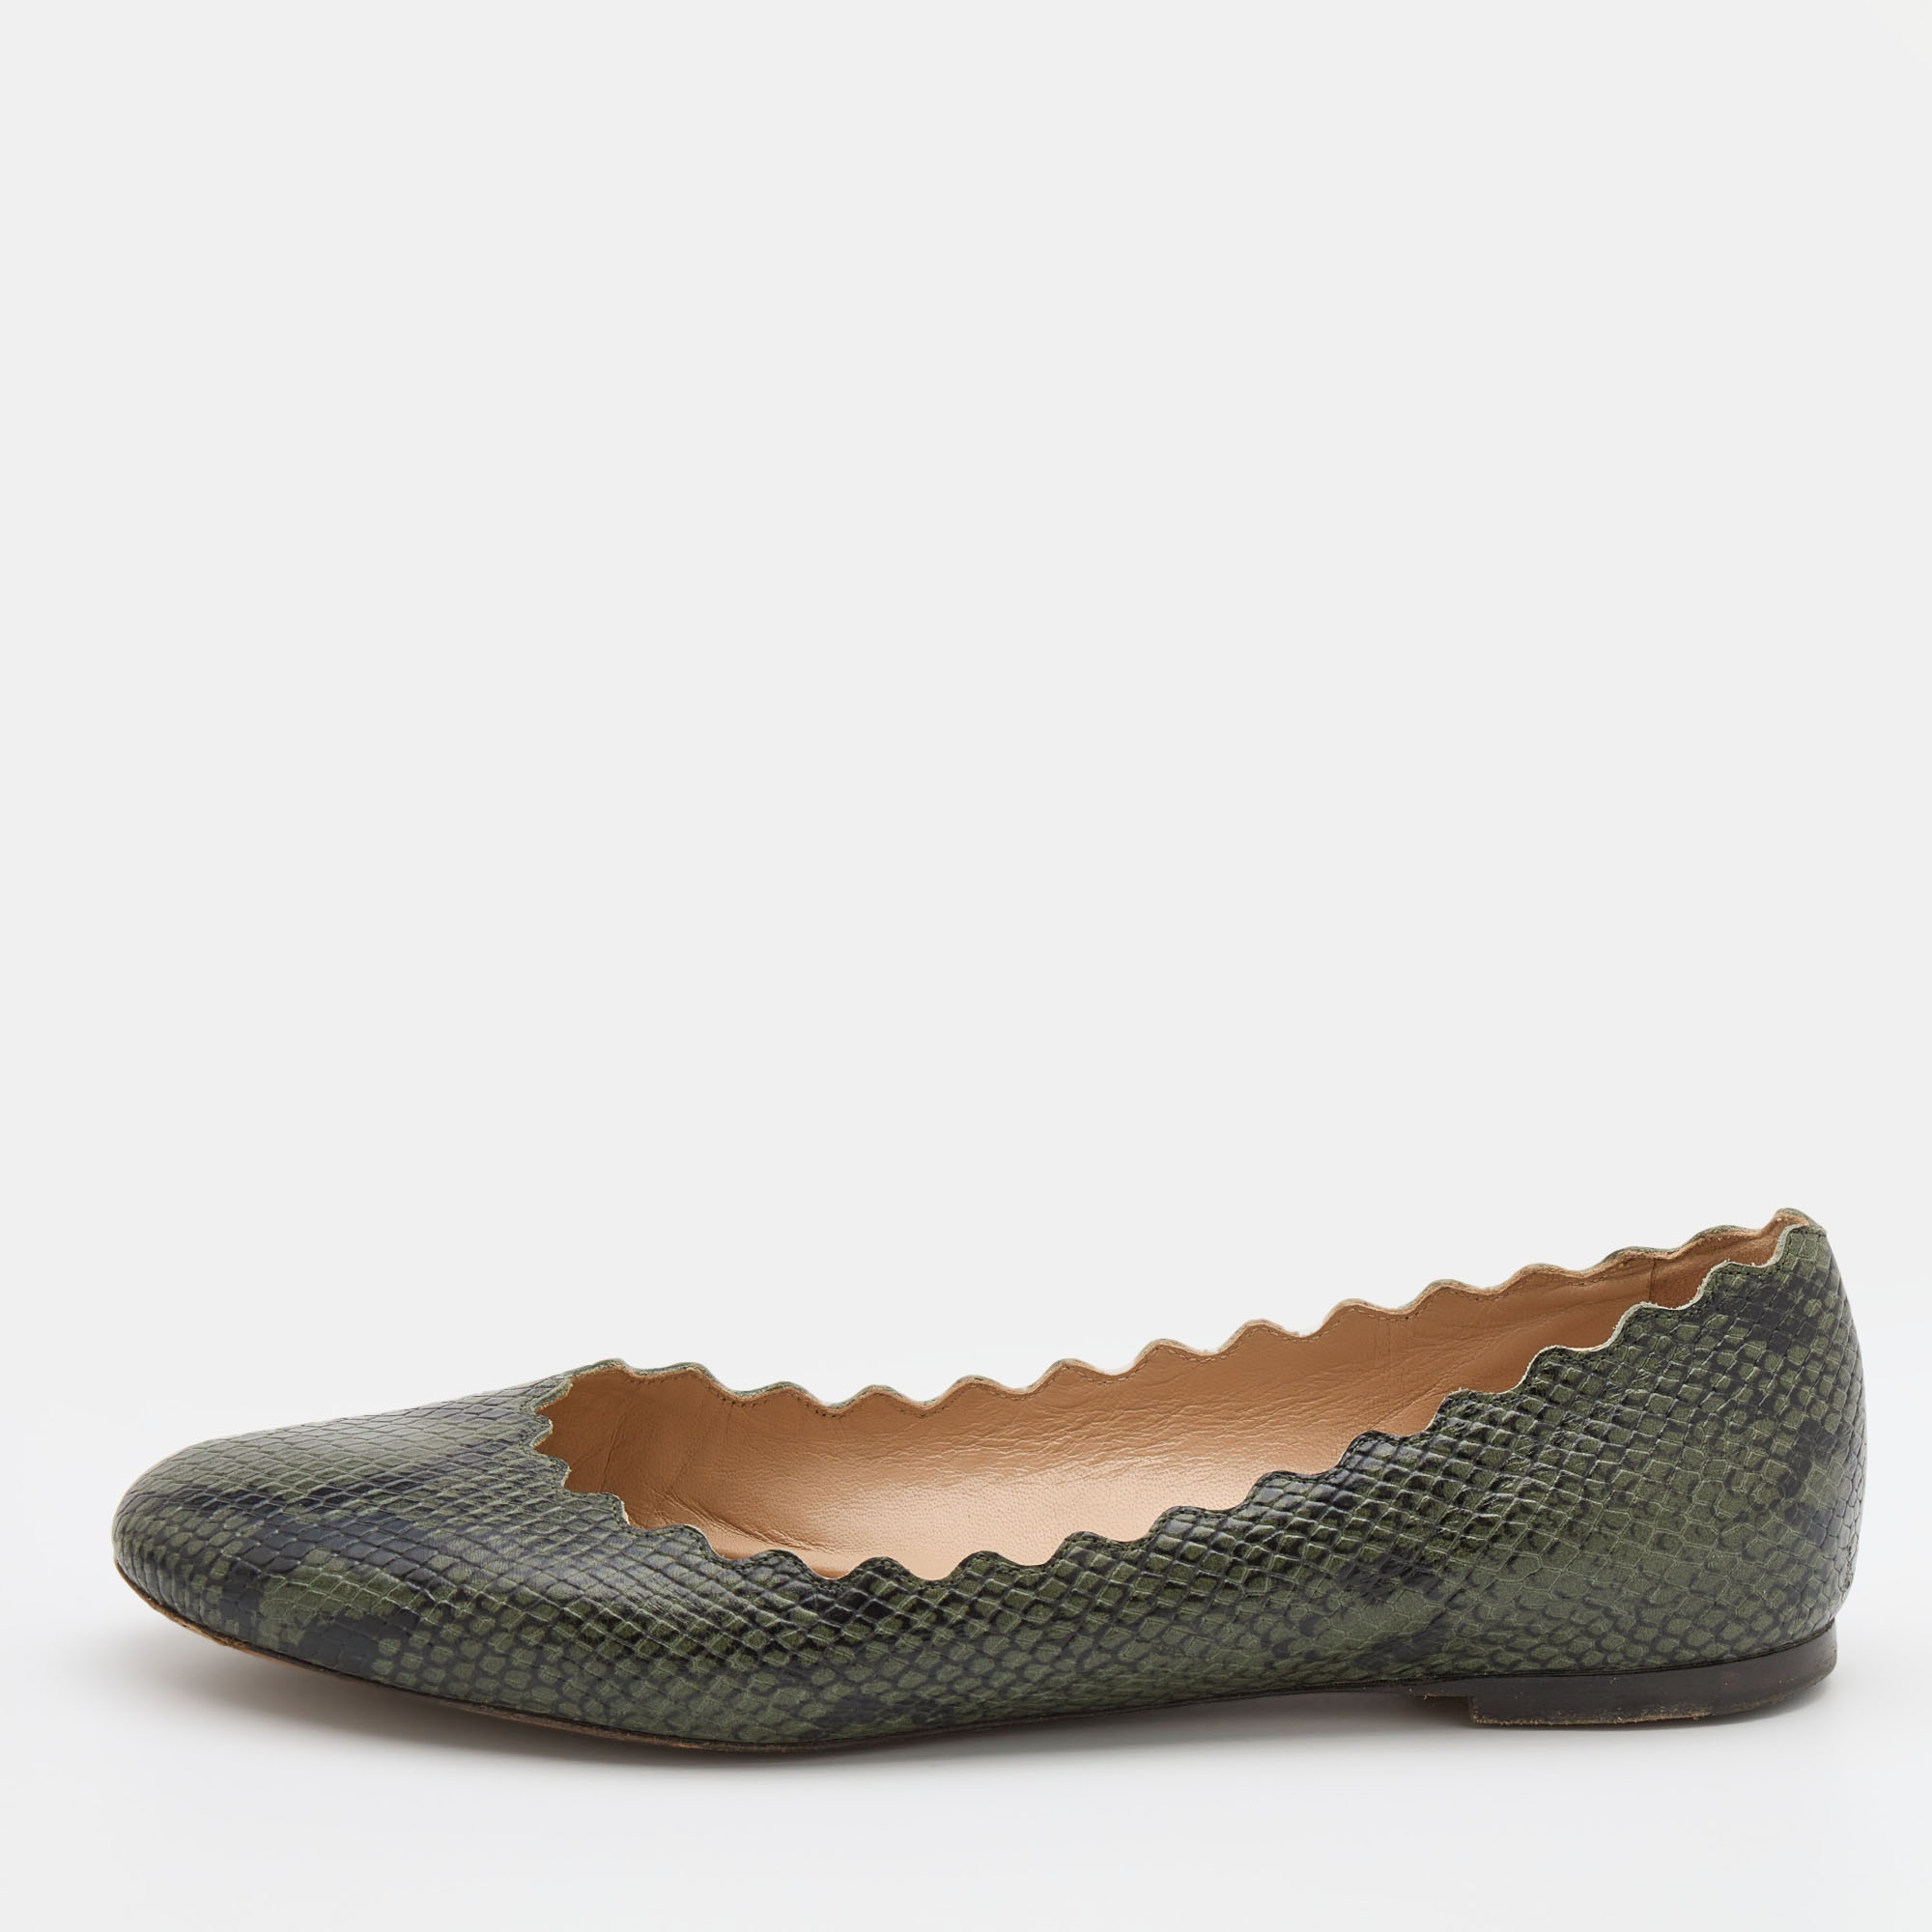 Pre-owned Chloé Green/black Python Embossed Leather Lauren Scallop Ballet Flats Size 40